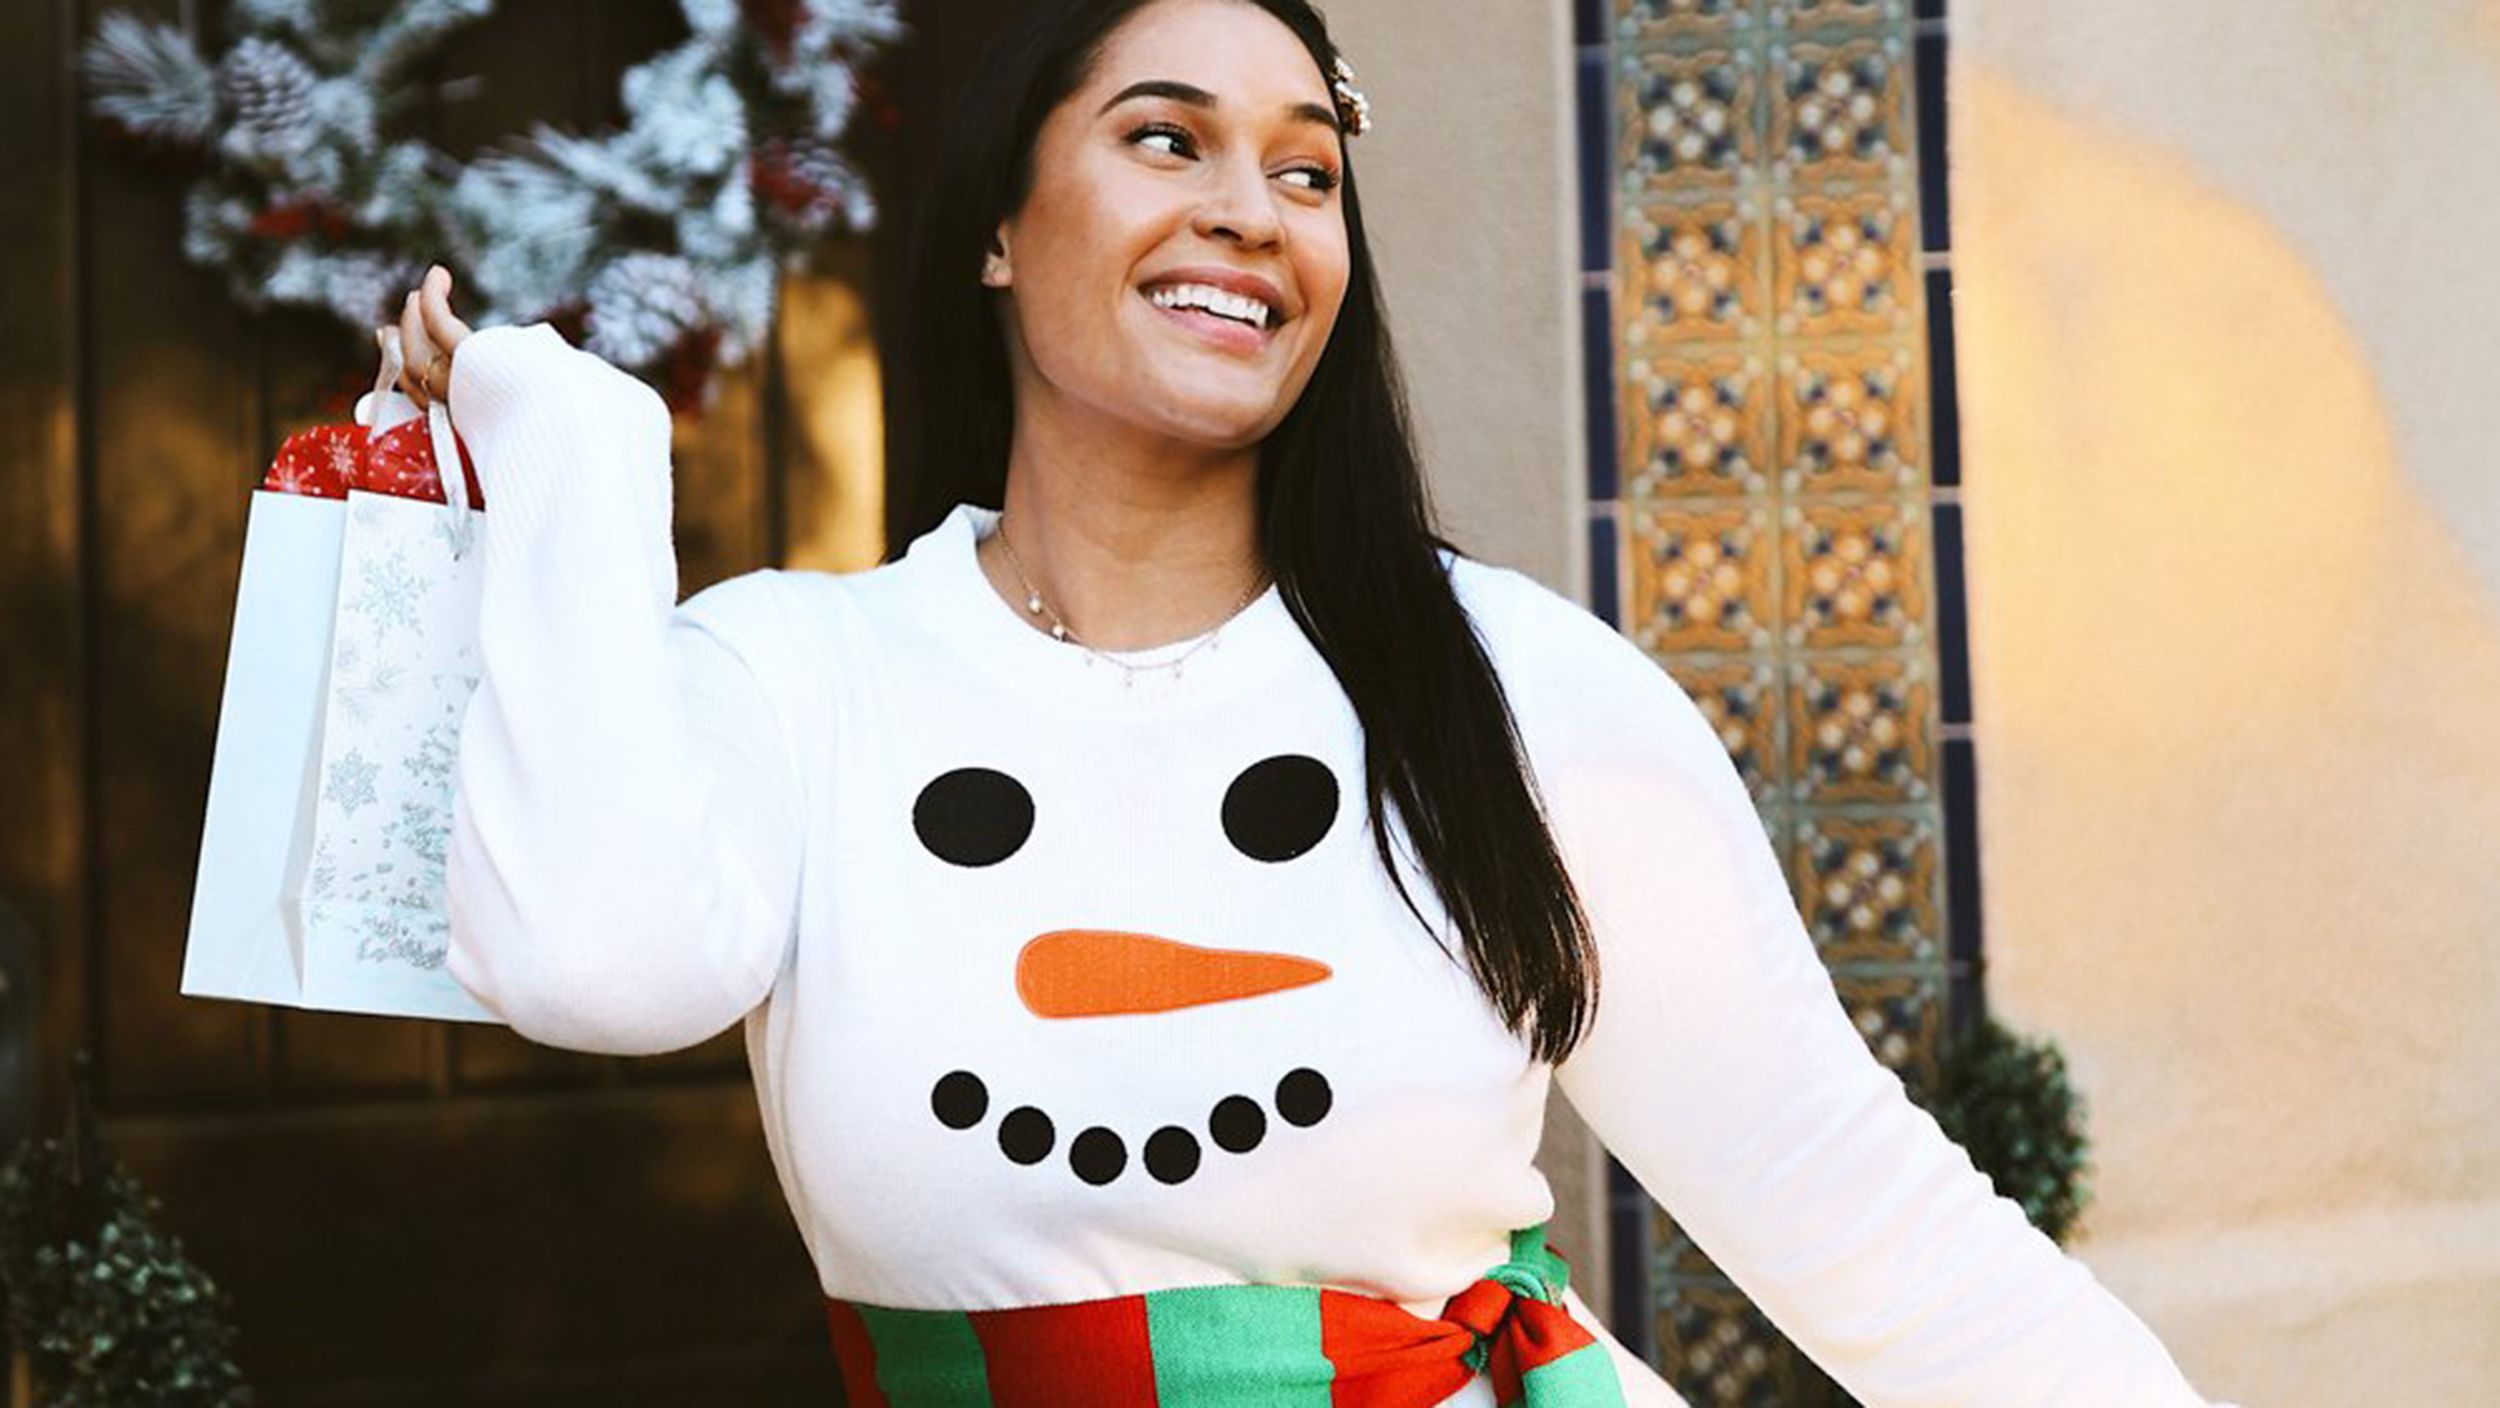 9 Christmas Sweaters That Will Get You In The Holiday Spirit